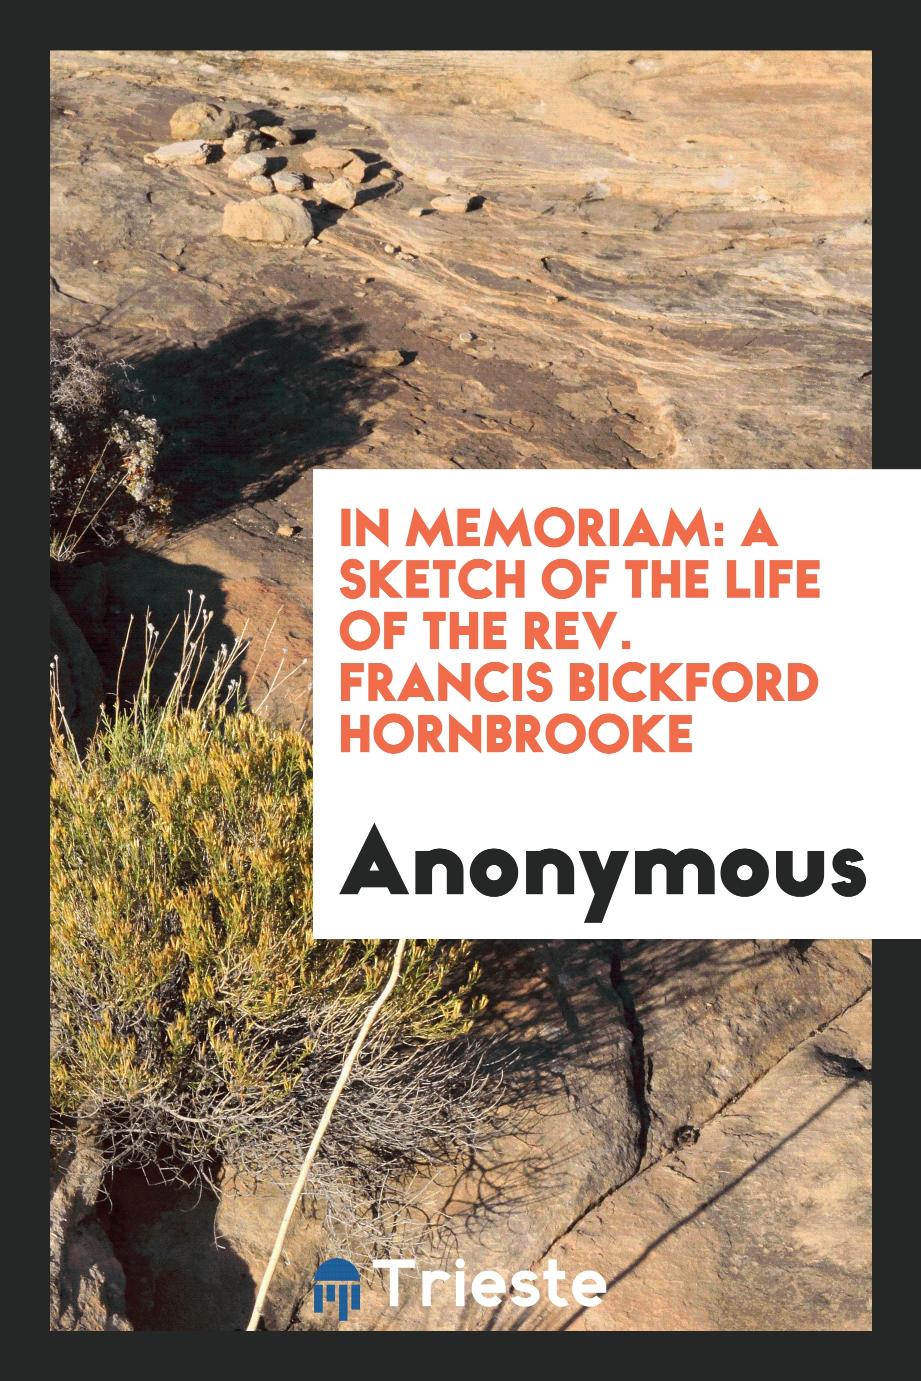 In Memoriam: A Sketch of the Life of the Rev. Francis Bickford Hornbrooke